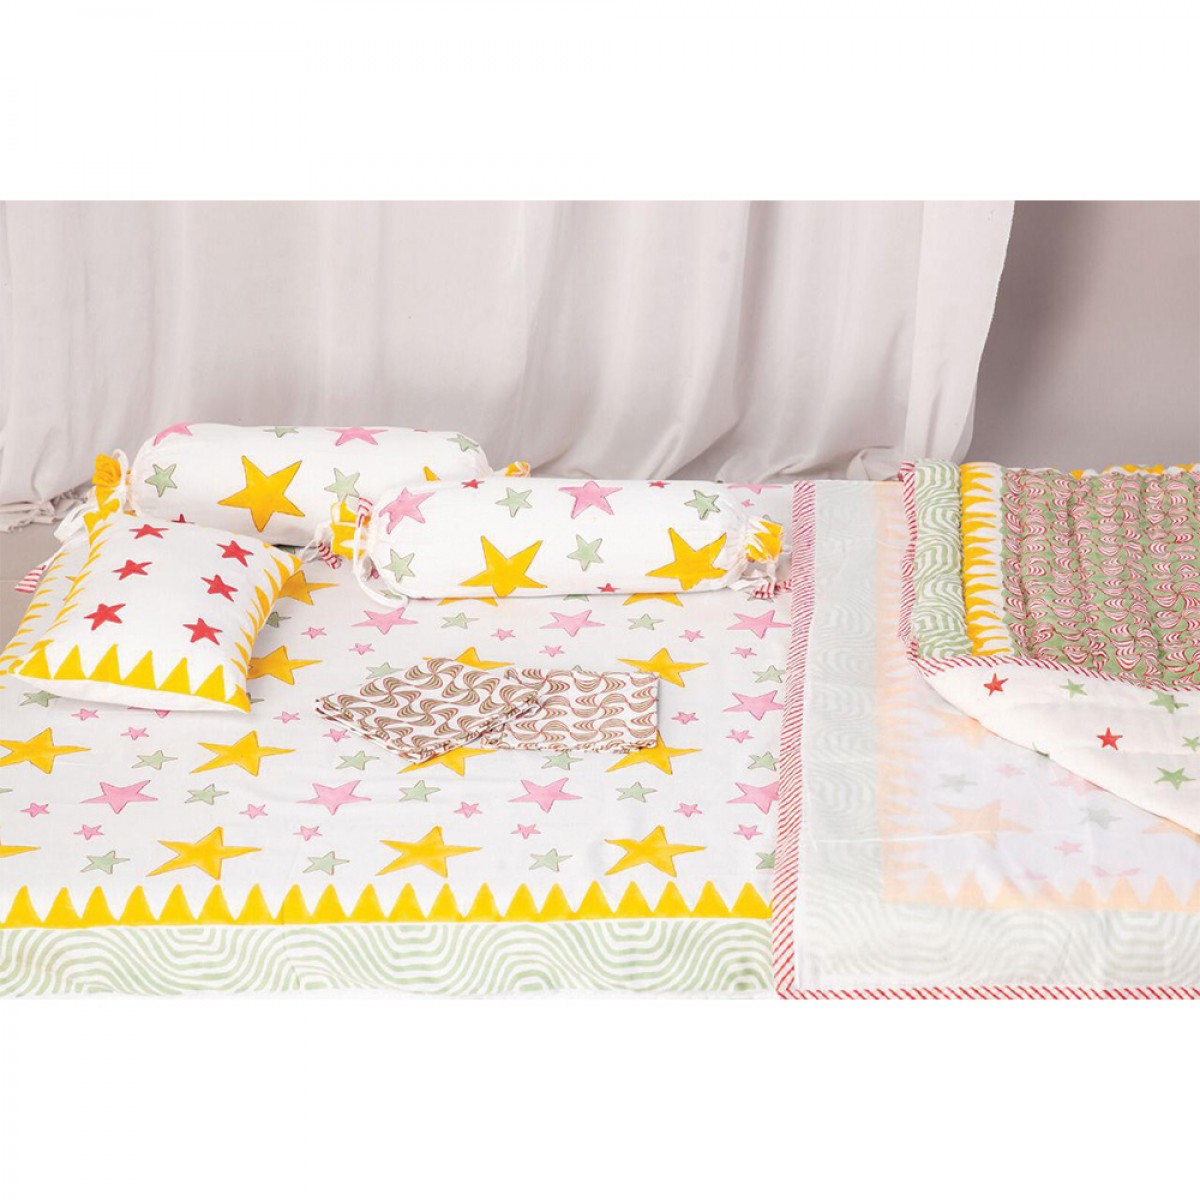 Baby Quilts Set - Multi Star ( set of 6 )